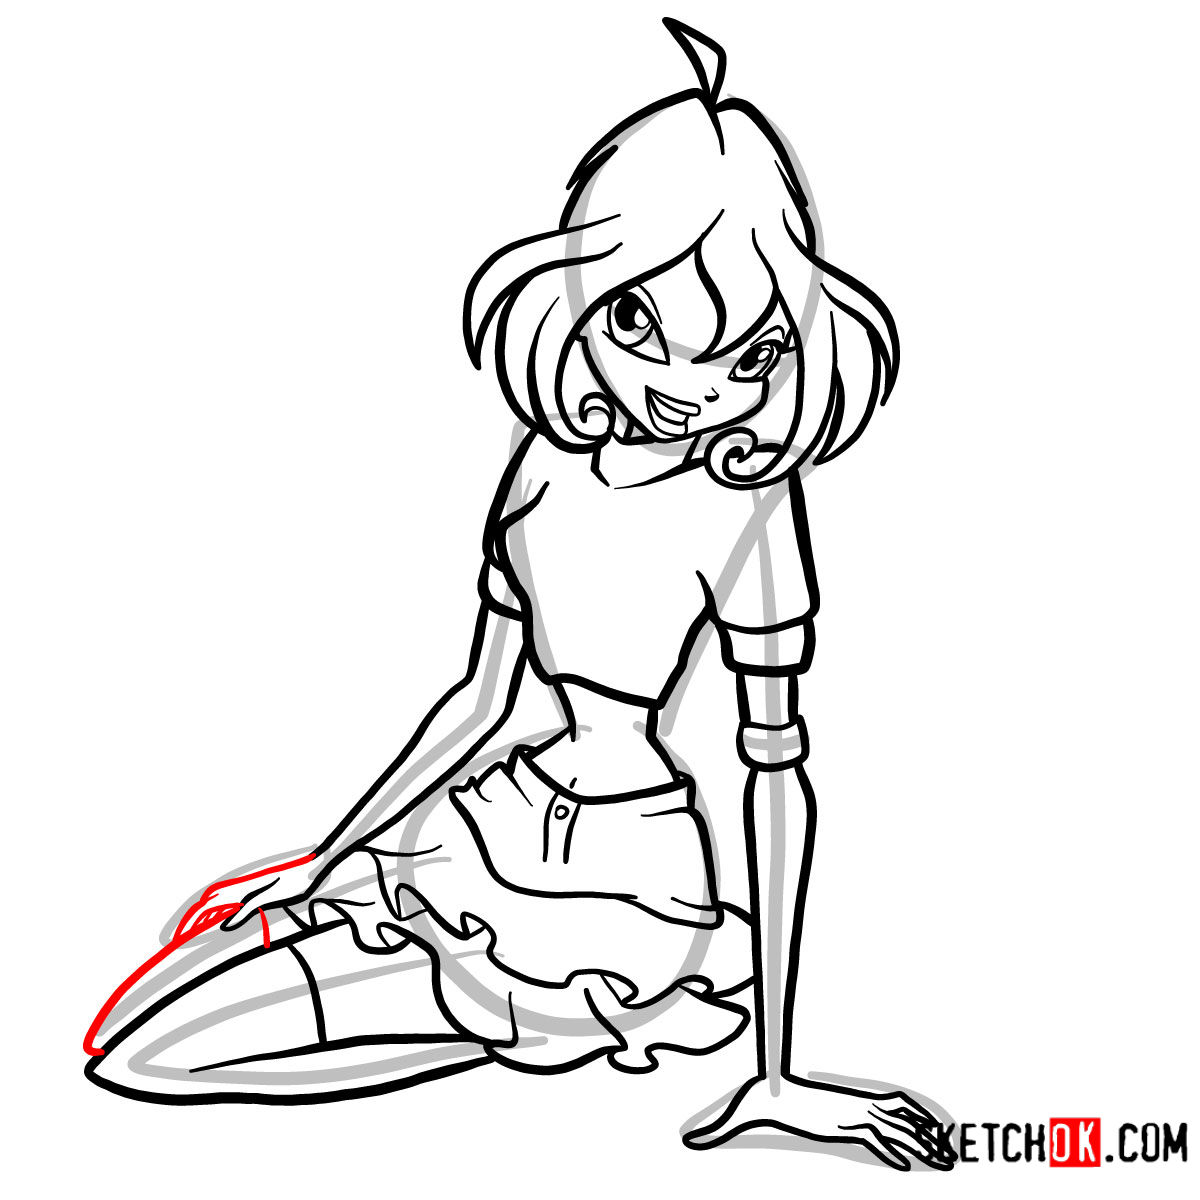 How to draw Bloom fire fairy sitting and smiling - step 11